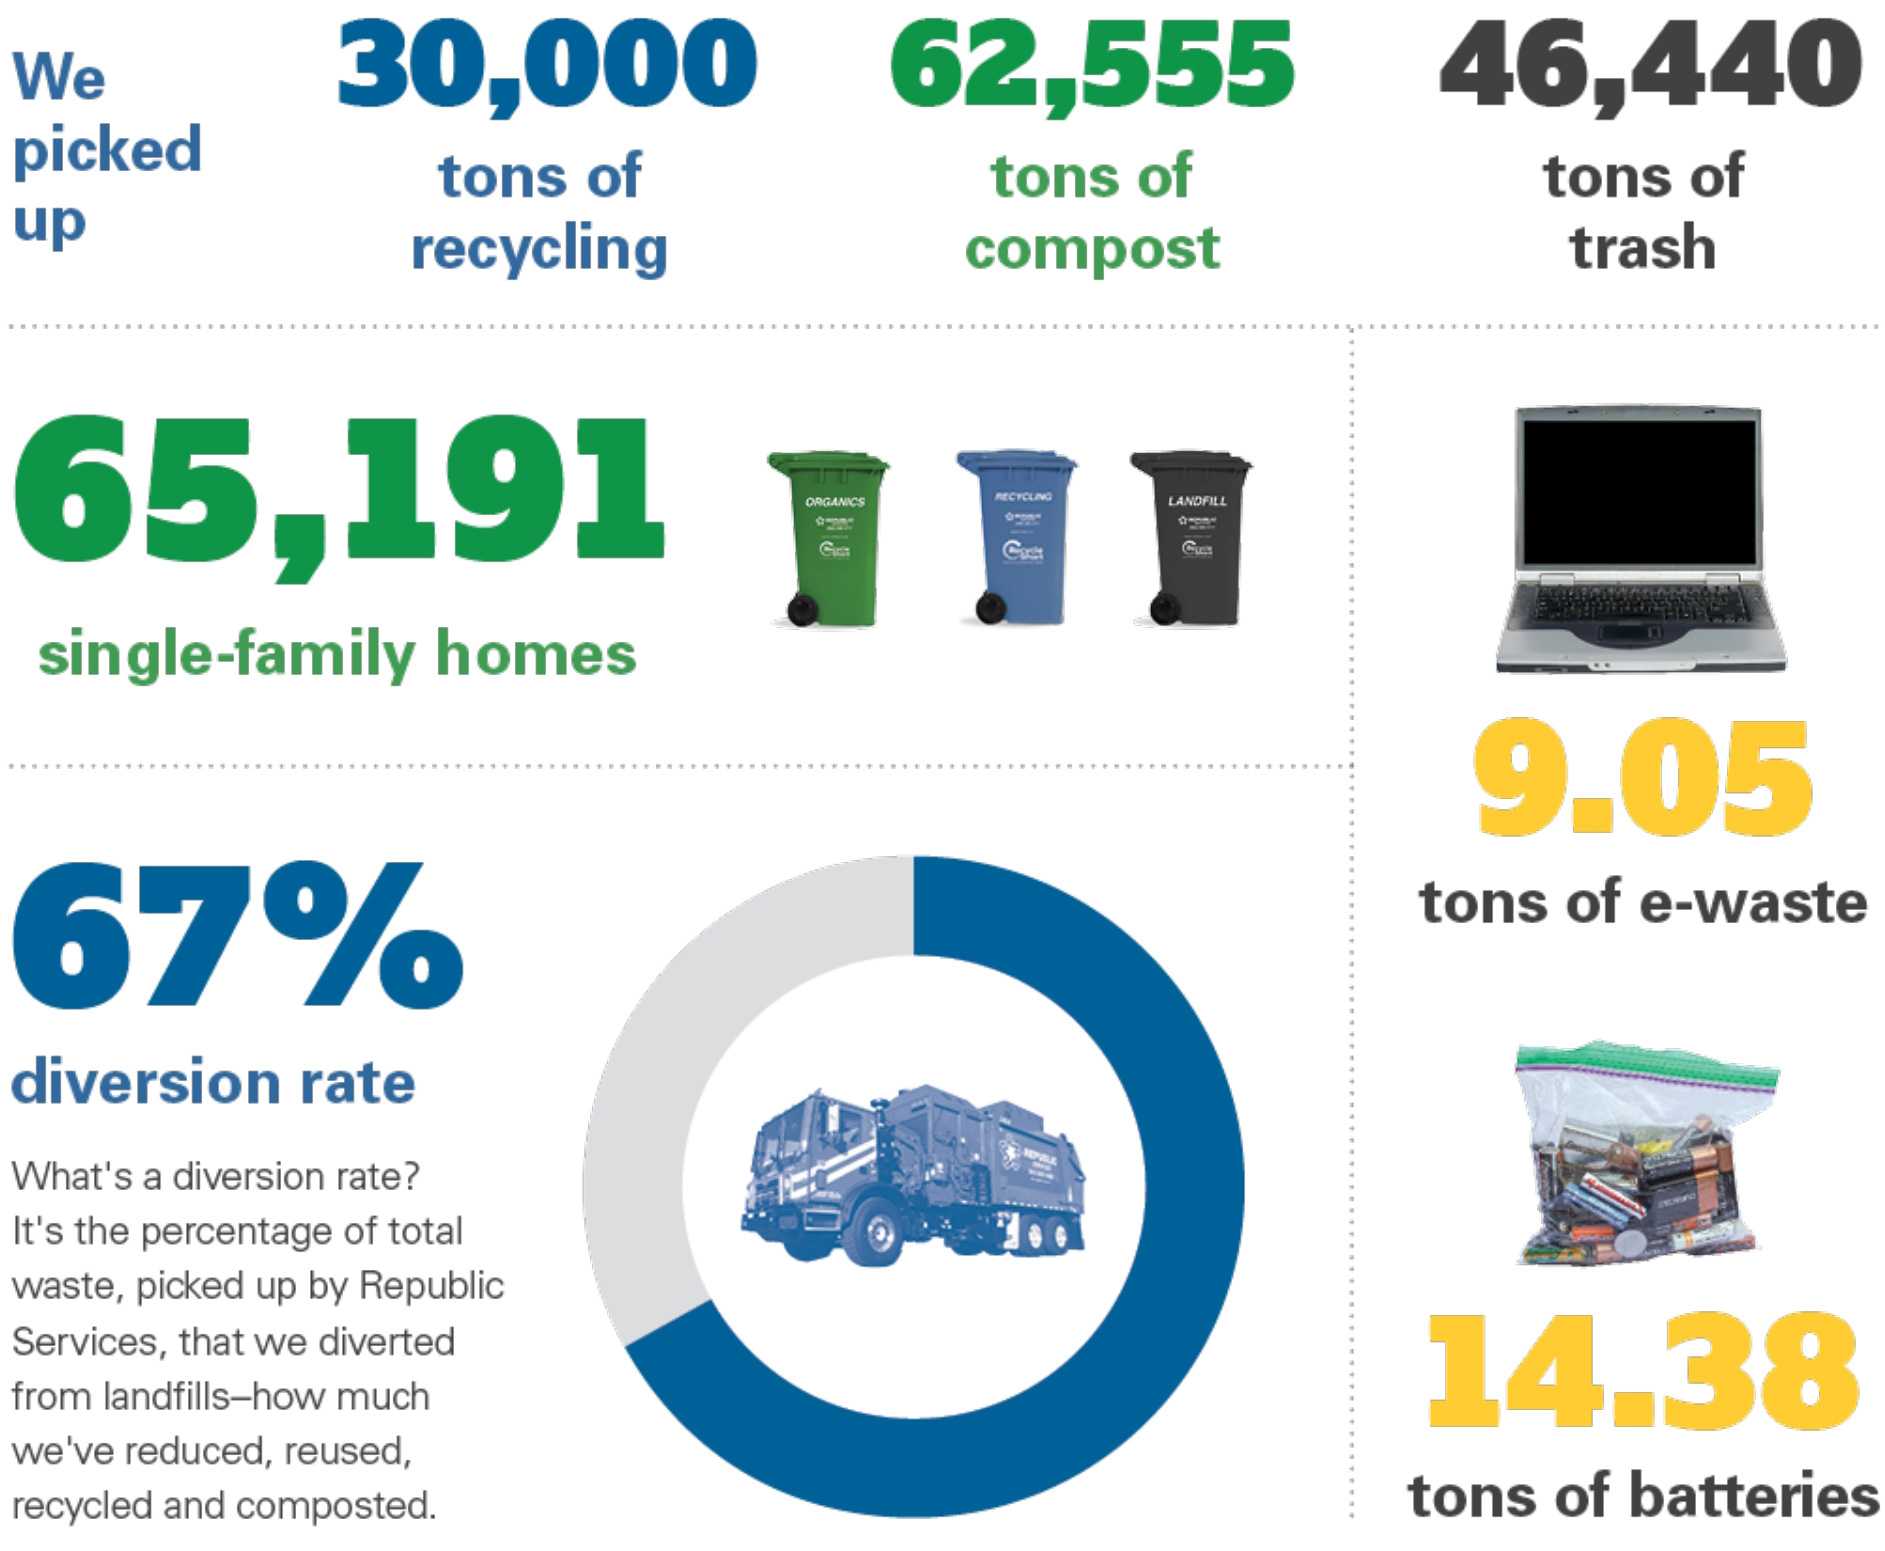 In 2021, We picked up 30,000 tons of recycling, 62,555 tons of compost, and 46, 440 tons of trash from 65,191 single family homes in the RecycleSmart service area. We also picked up 9.05 tons of e-waste and 14.38 tons of batteries for recycling. Our diversion rate, the percentage of total waste, picked up by Republic Services, that we diverted from landfills, is 67%